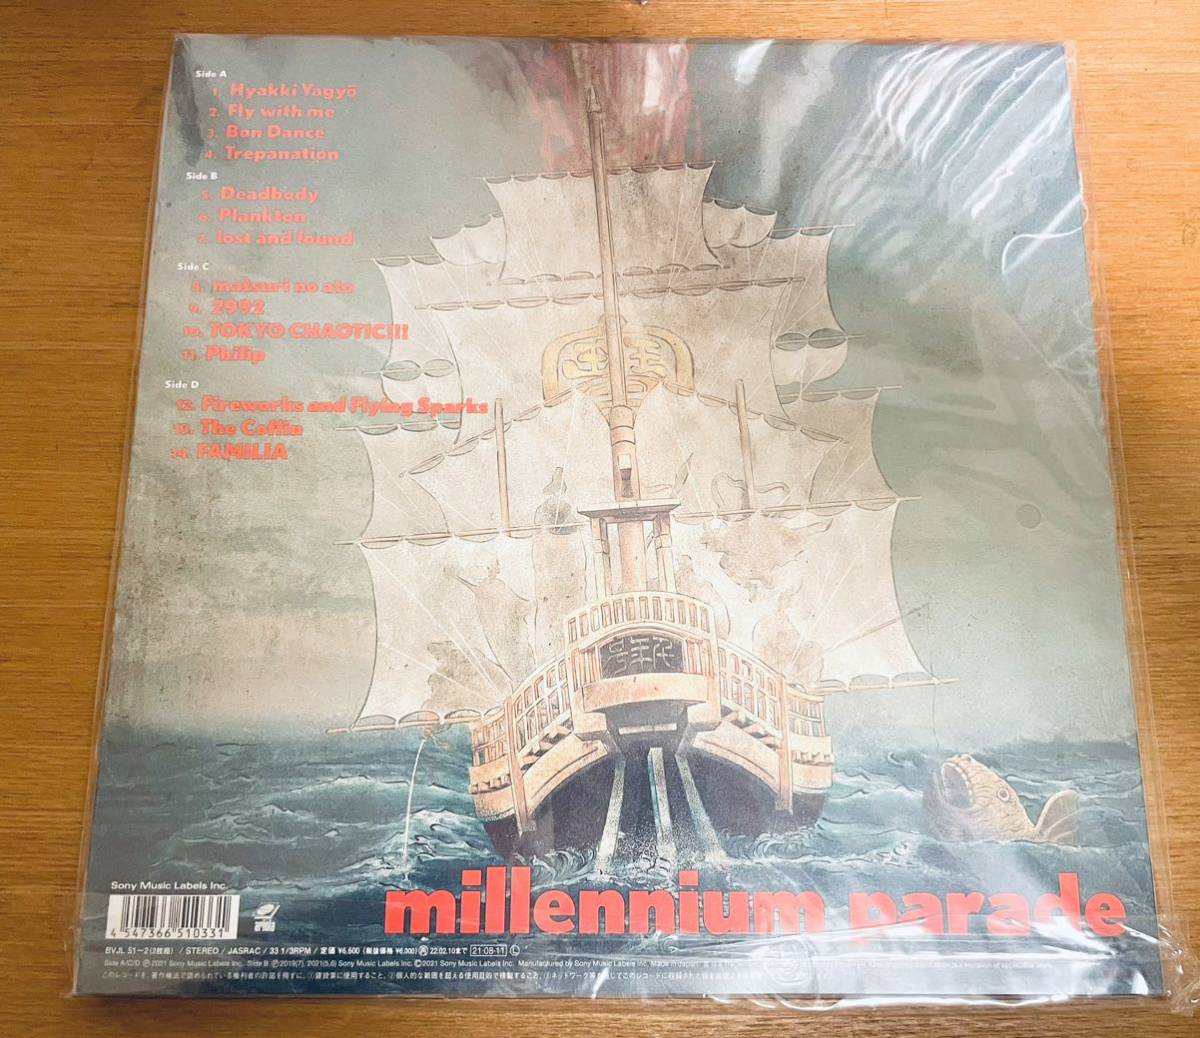  ultra rare!! unused!millennium parade< complete production limitation record > LP record millenium pare-do. rice field large . King n-king gnu Ghost in the Shell SAC_2045